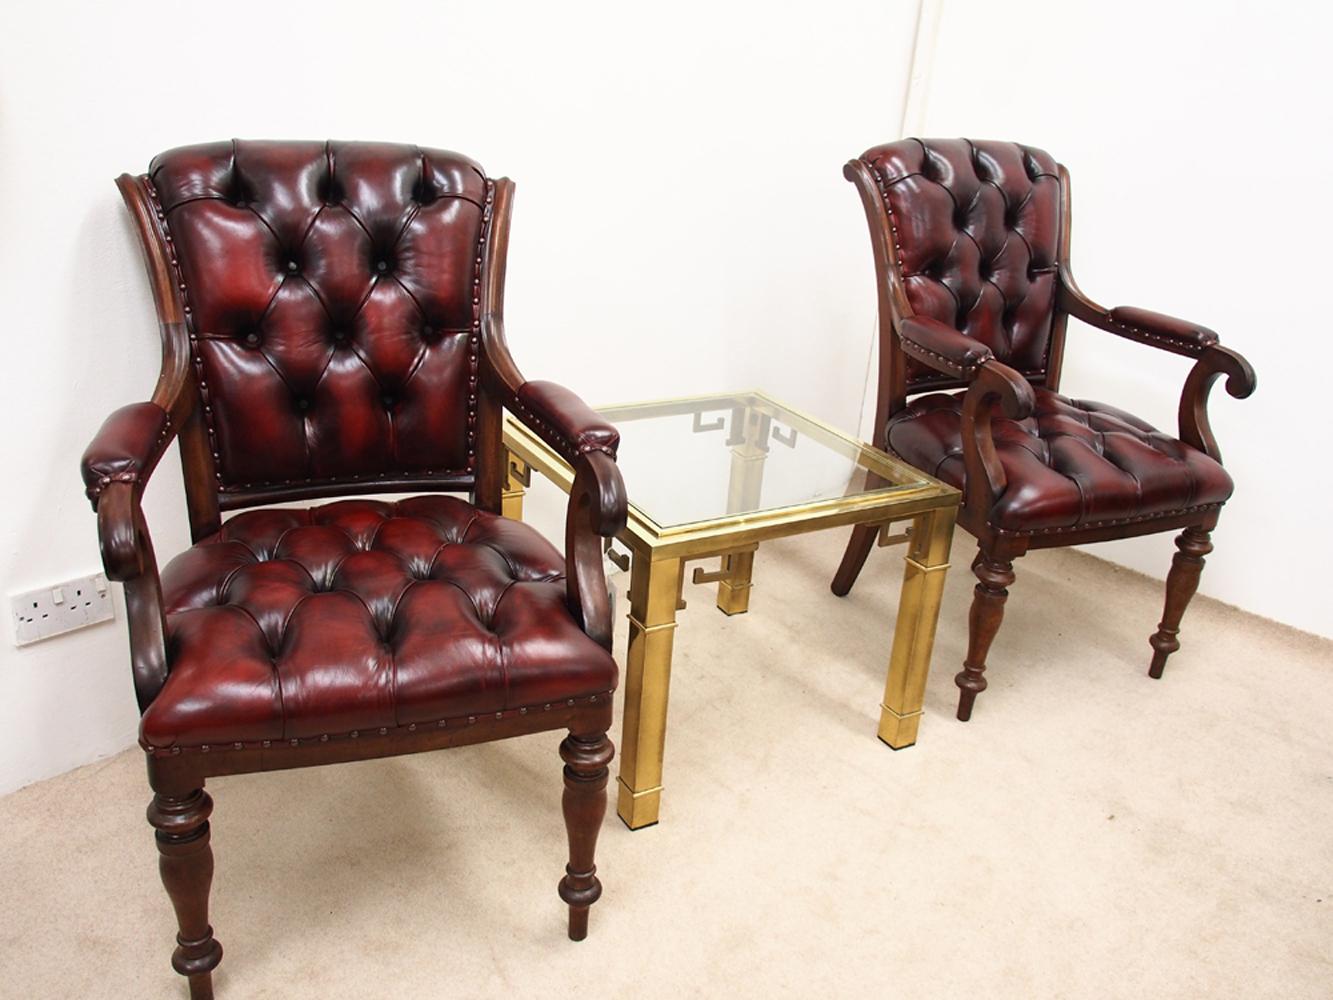 Pair of William IV mahogany library chairs, circa 1840. The mahogany framed chairs have a shaped, flared back, and have been recently reupholstered in deep buttoned burgundy leather. With a slight scroll to the top of each frame, continuing down to